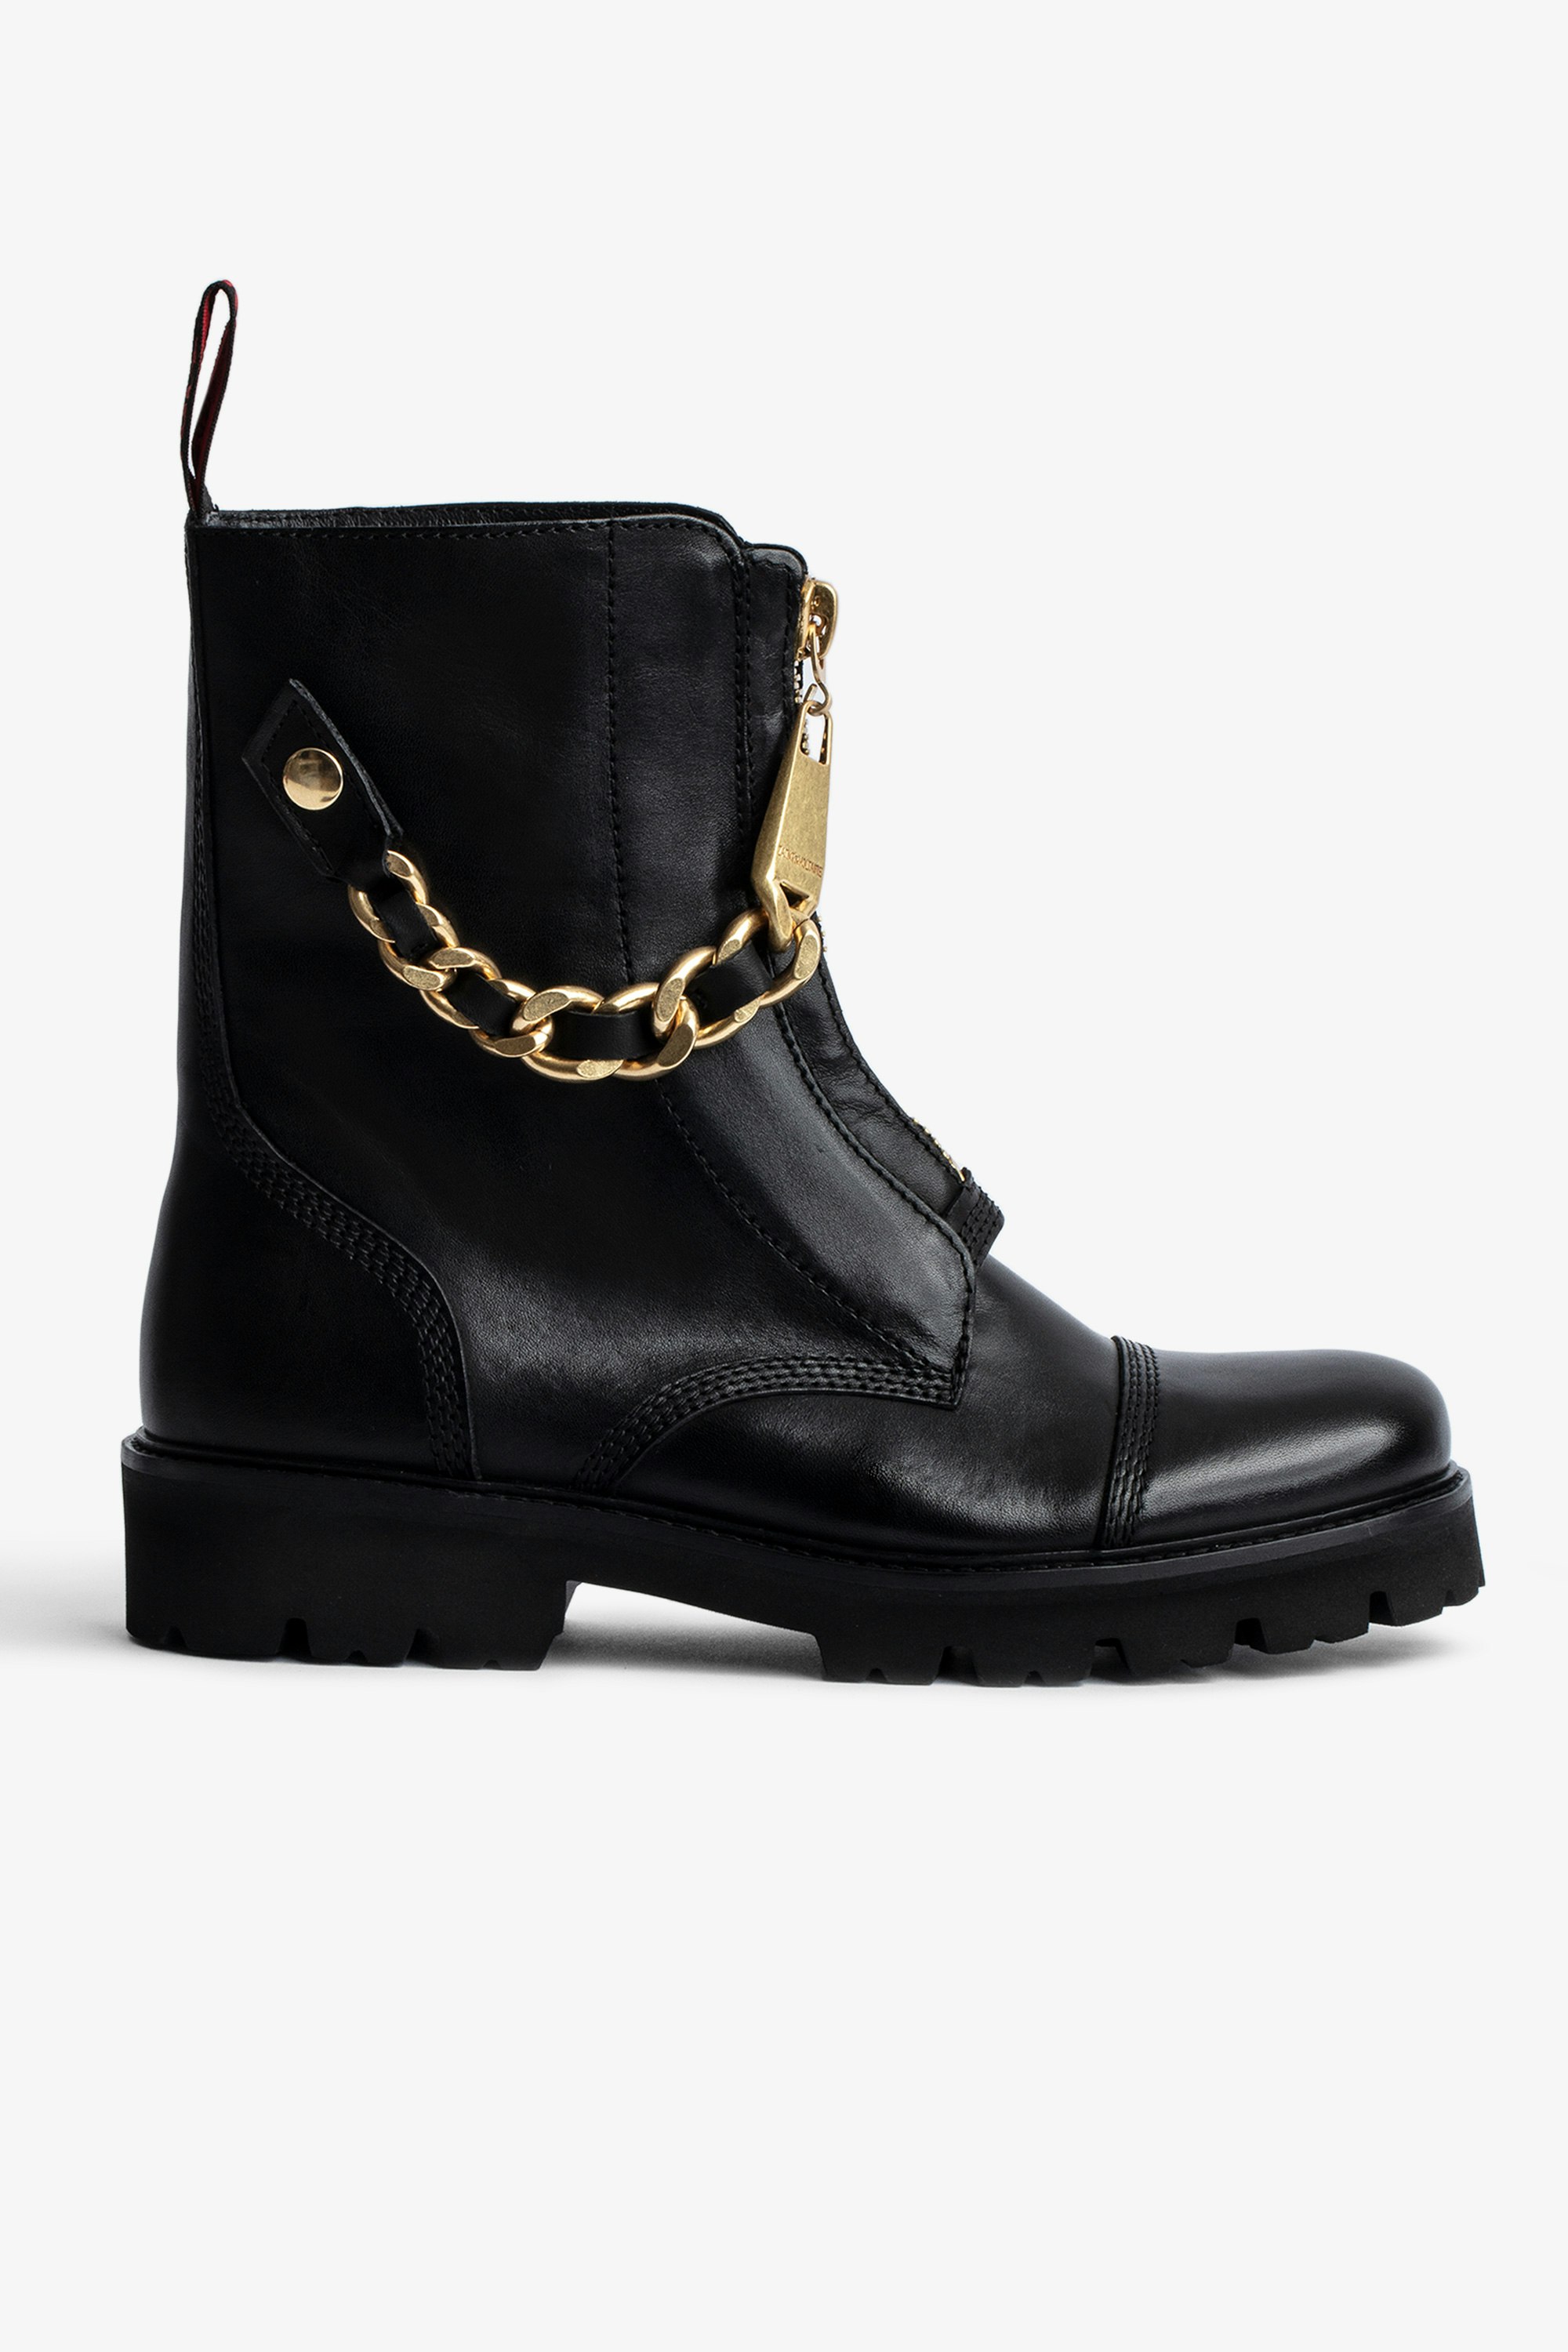 Joe Ankle ブーツ Women’s black smooth leather mid-calf boots with an interwoven gold-tone and leather chain